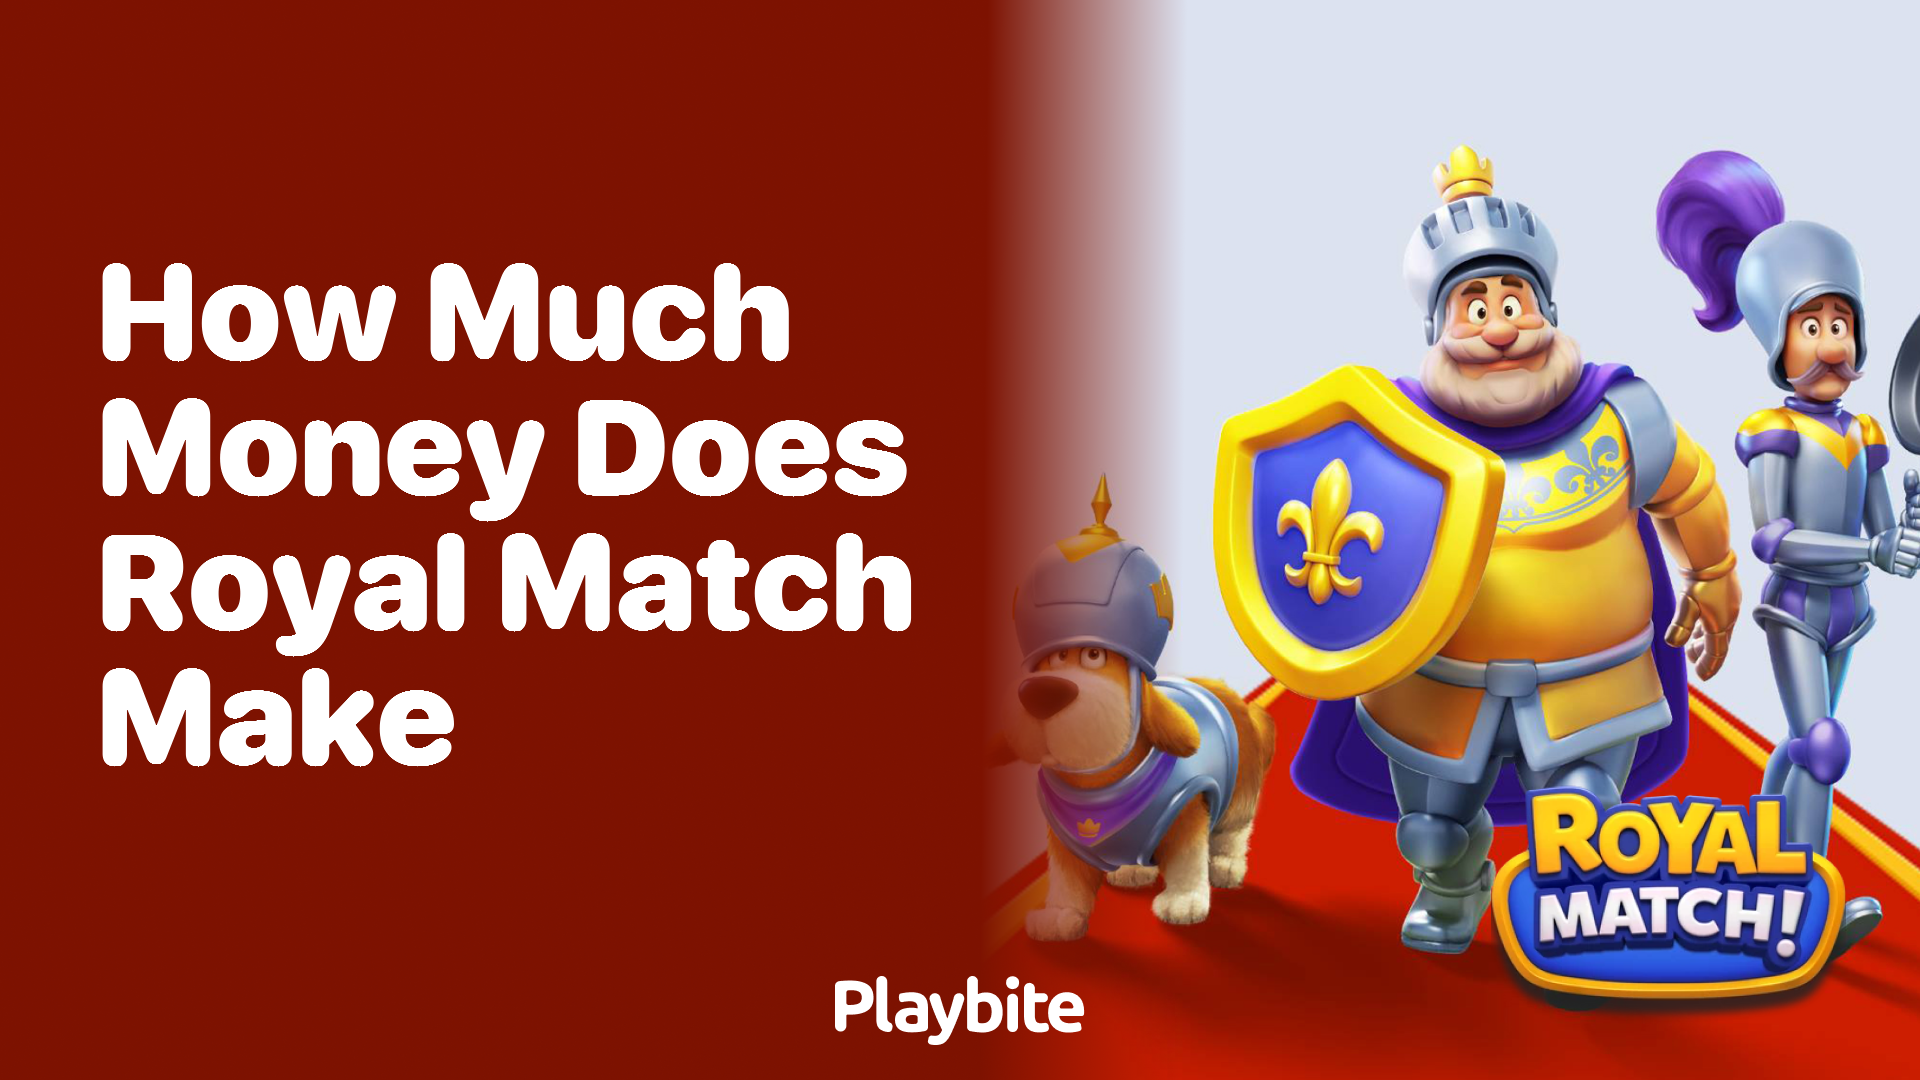 How Much Money Does Royal Match Make?